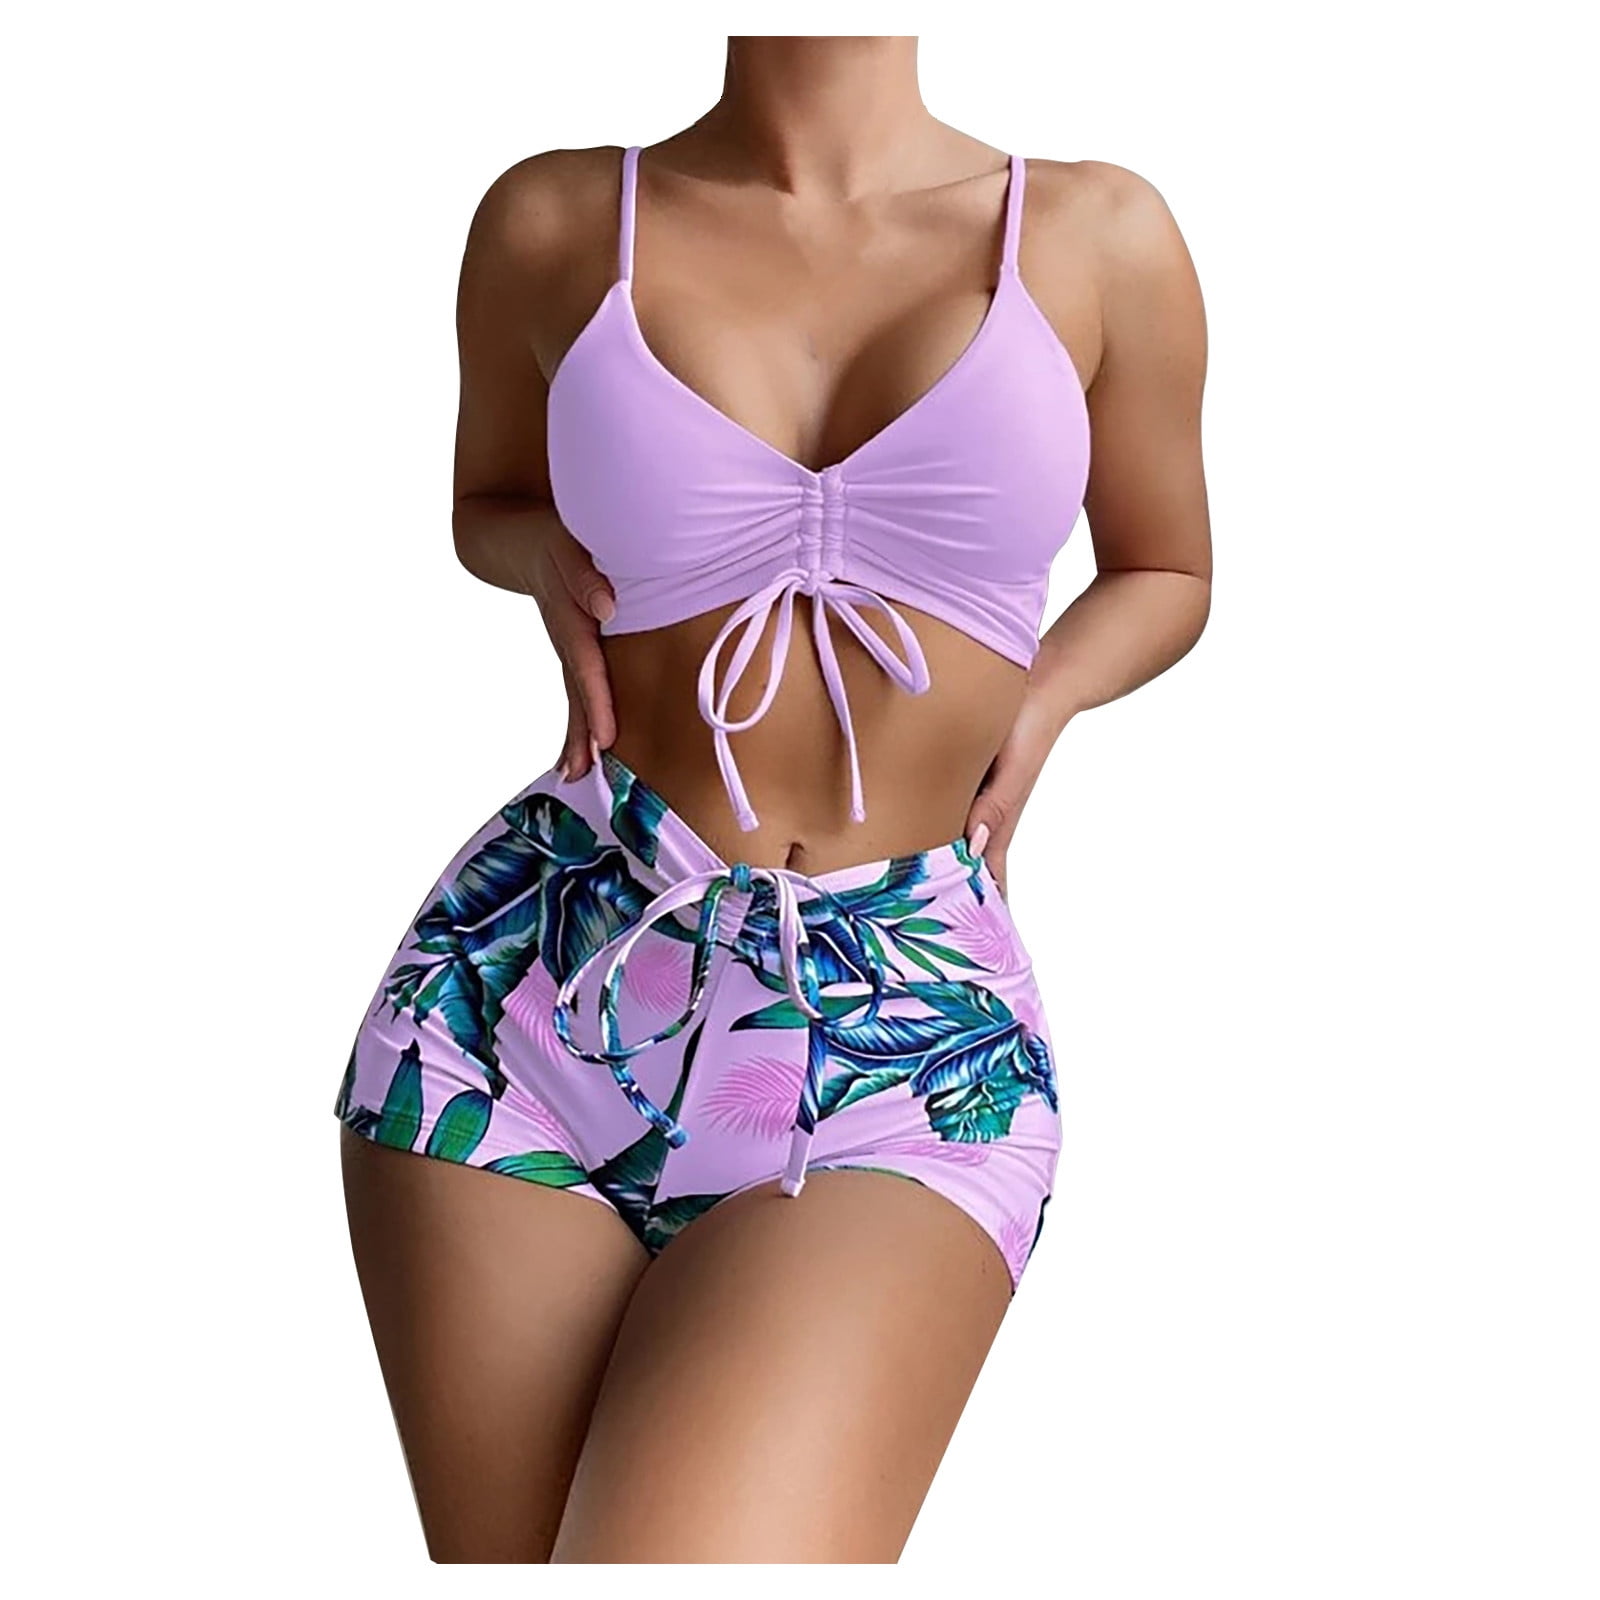 ZQGJB Women's High Waisted Bikini Ruched Front Tie Knot Scoop Neck Swimsuit  with Tummy Control Boyshorts Two Pieces Bathing Suit Purple,M 